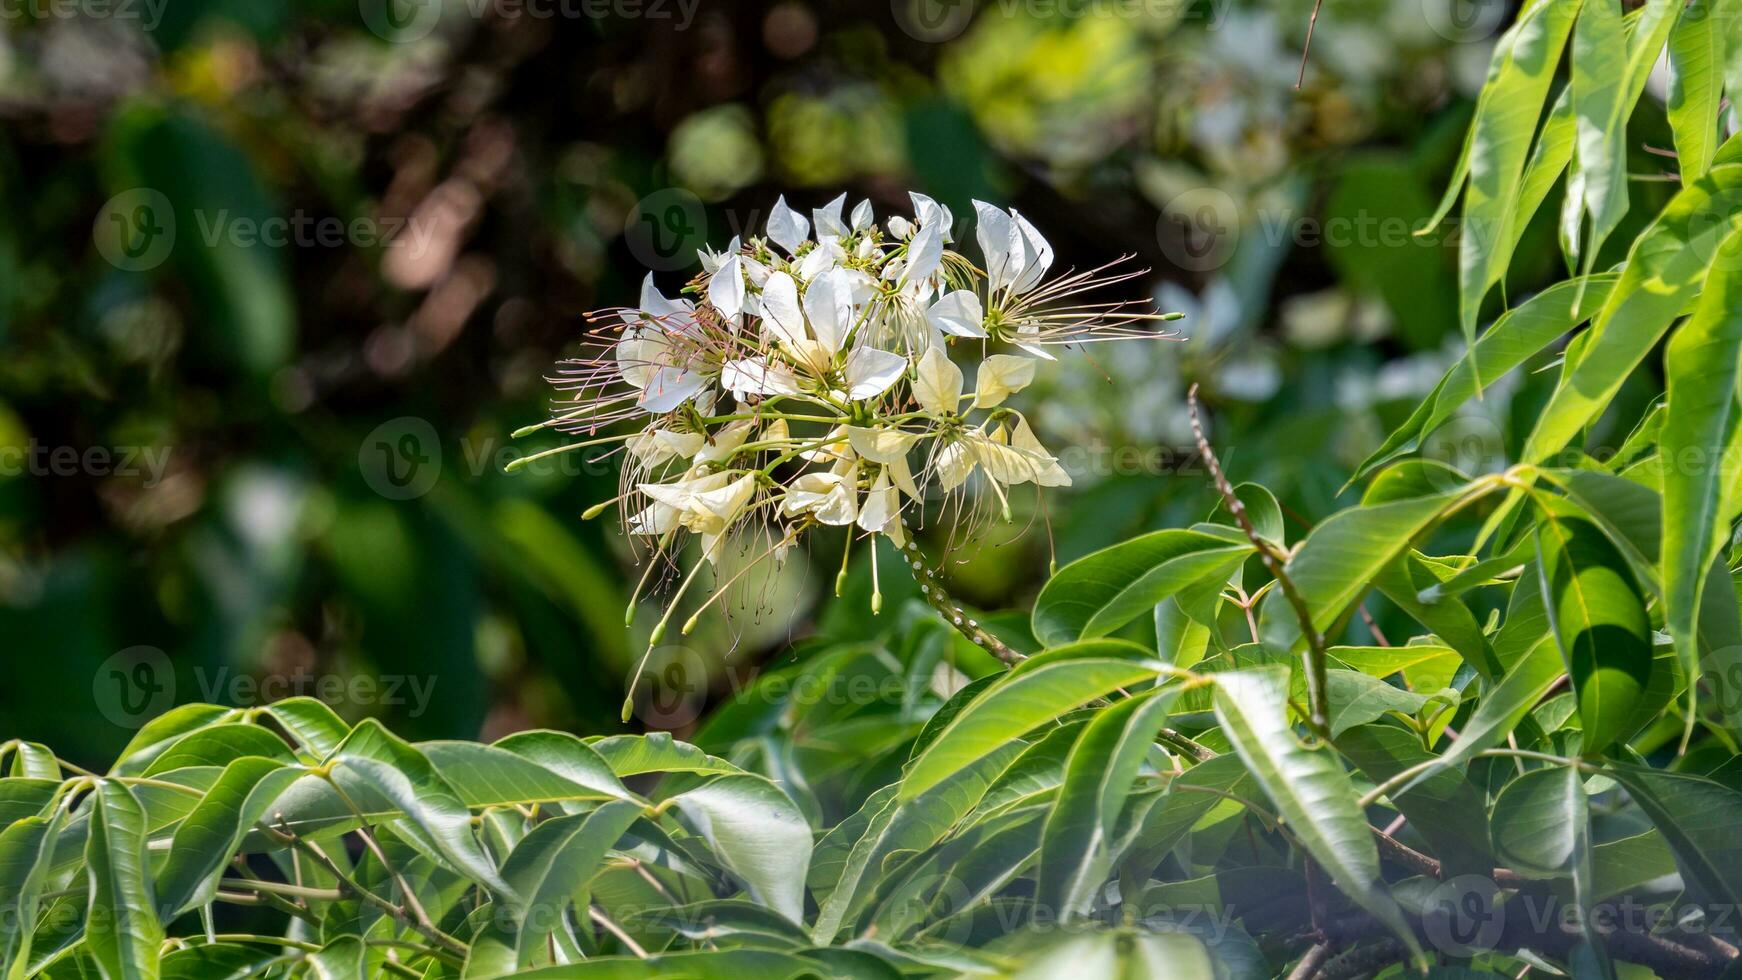 Crateva tapia, Spider Flower Tree is native to tropical America. It's an ethnomedical used in Ayurvedic medicine. It can withstand full sun and enjoys regular water. photo